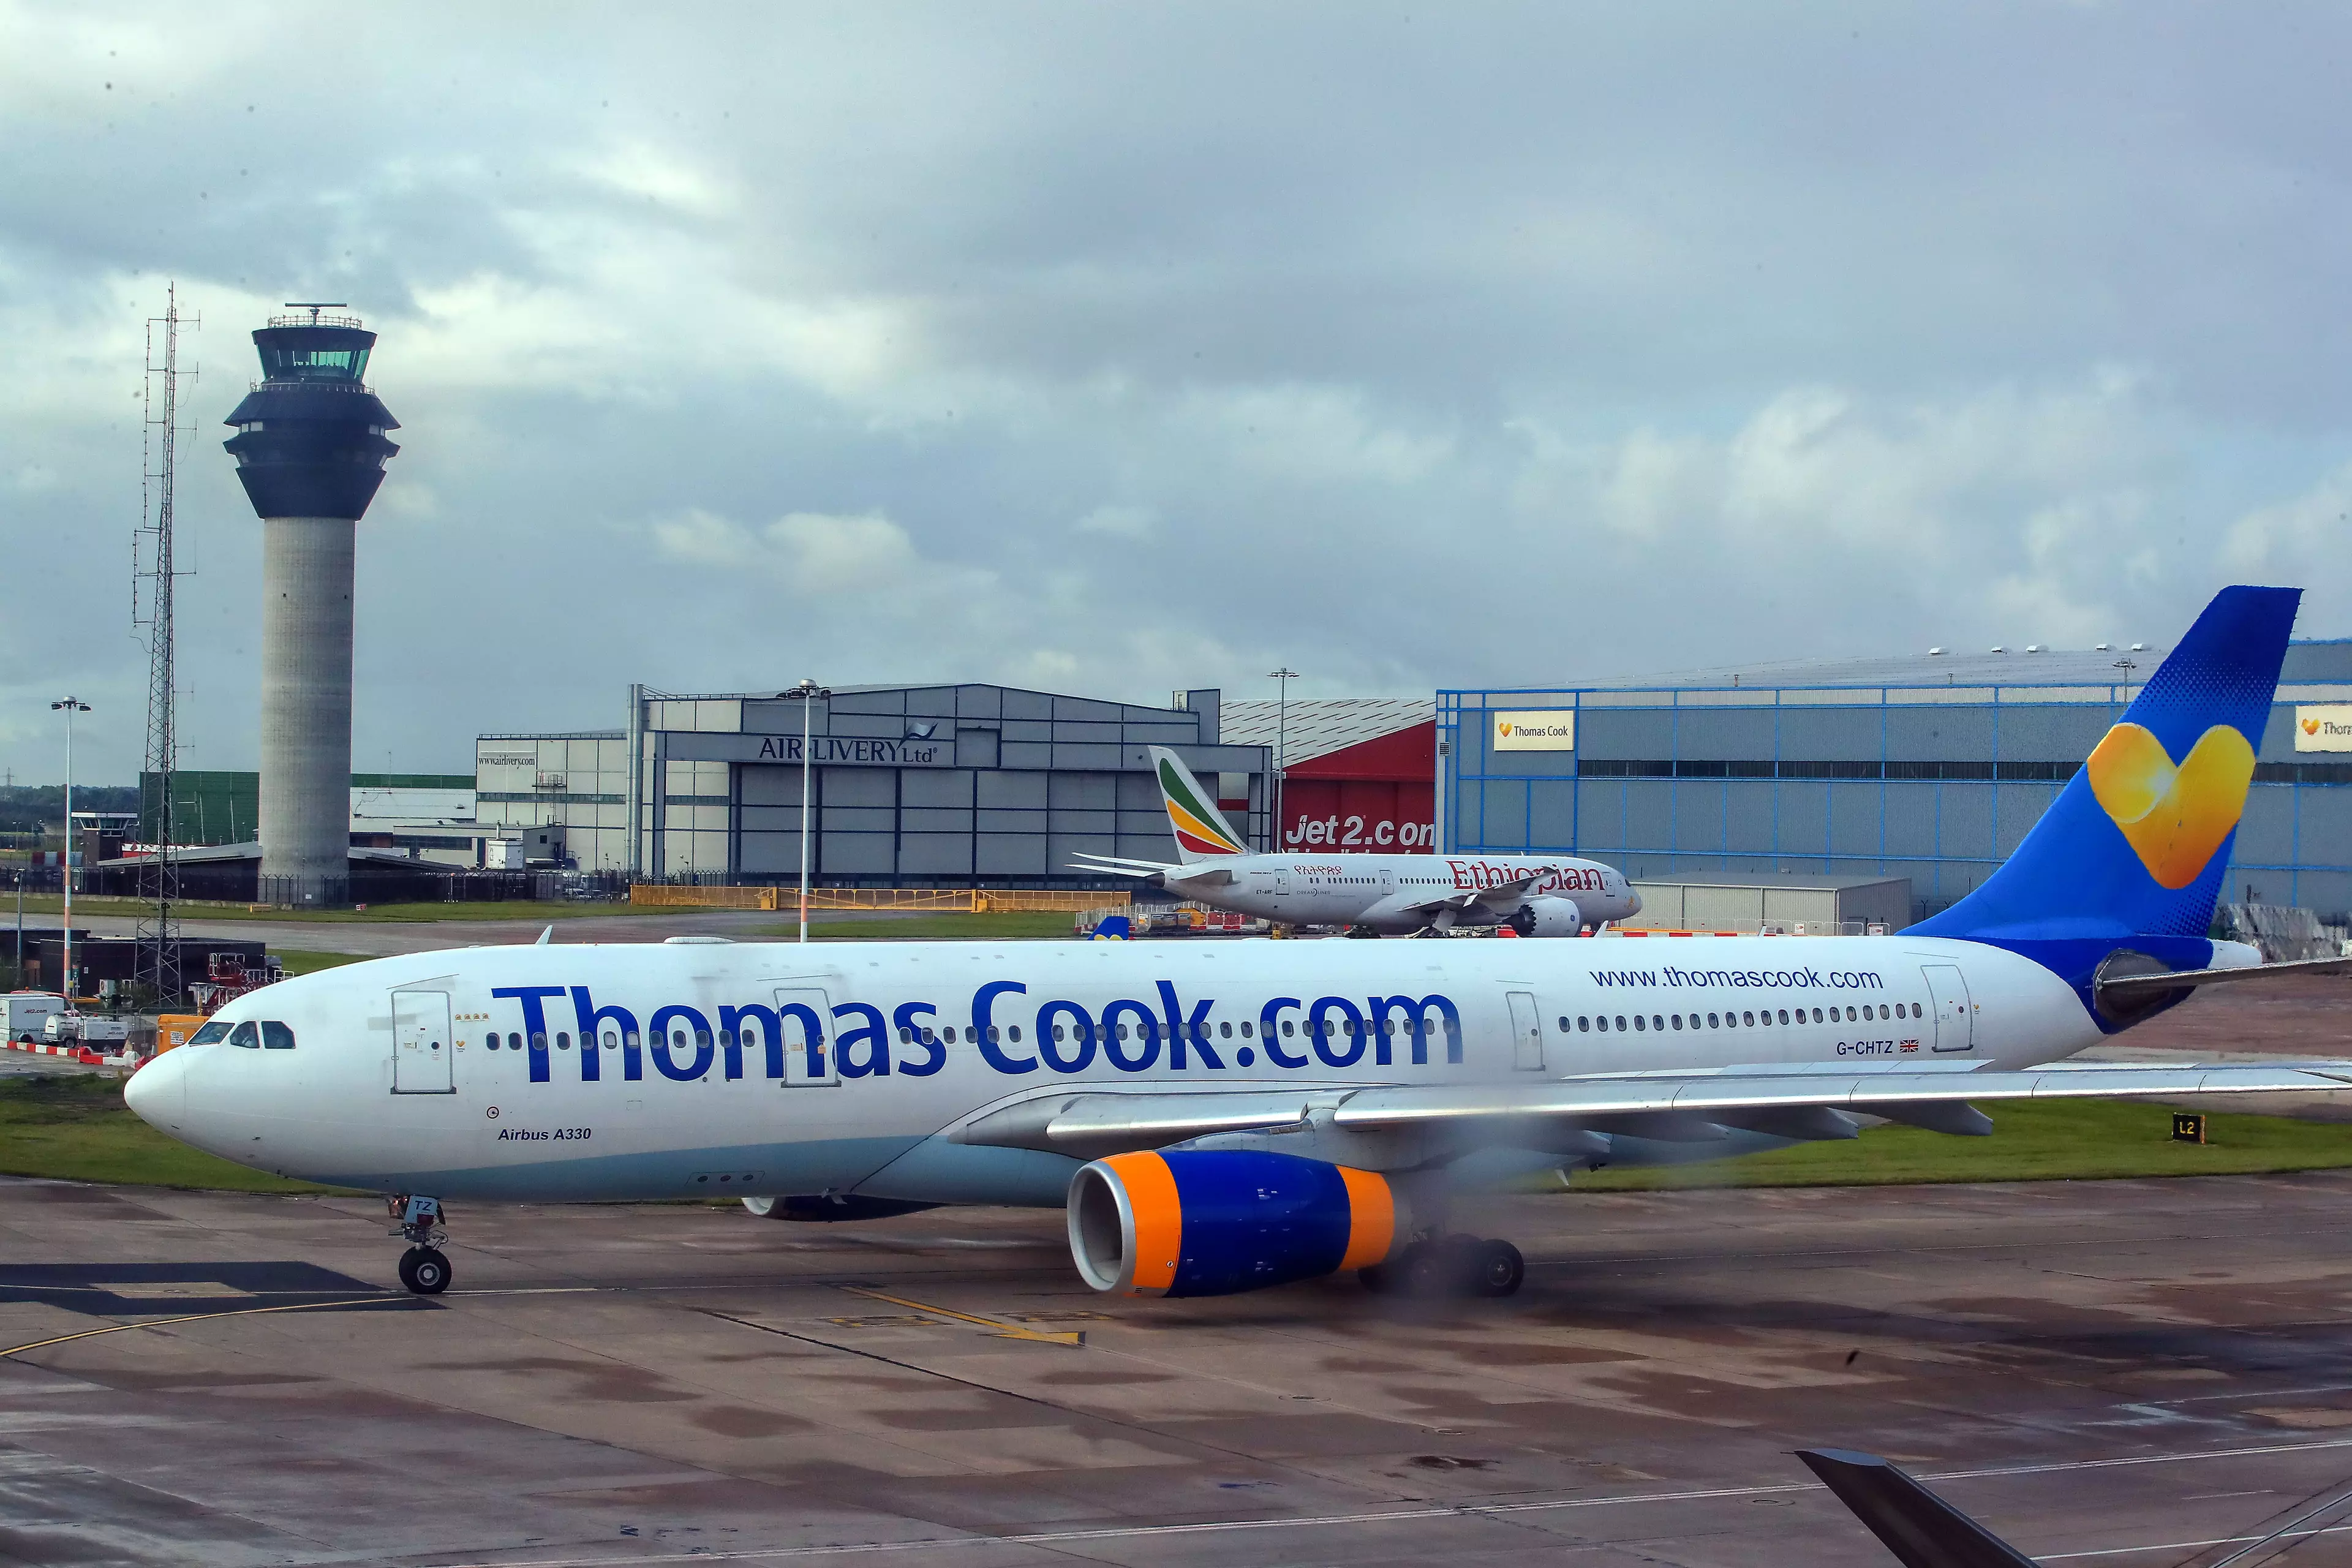 People Are Worried That Their Thomas Cook holidays are at risk.